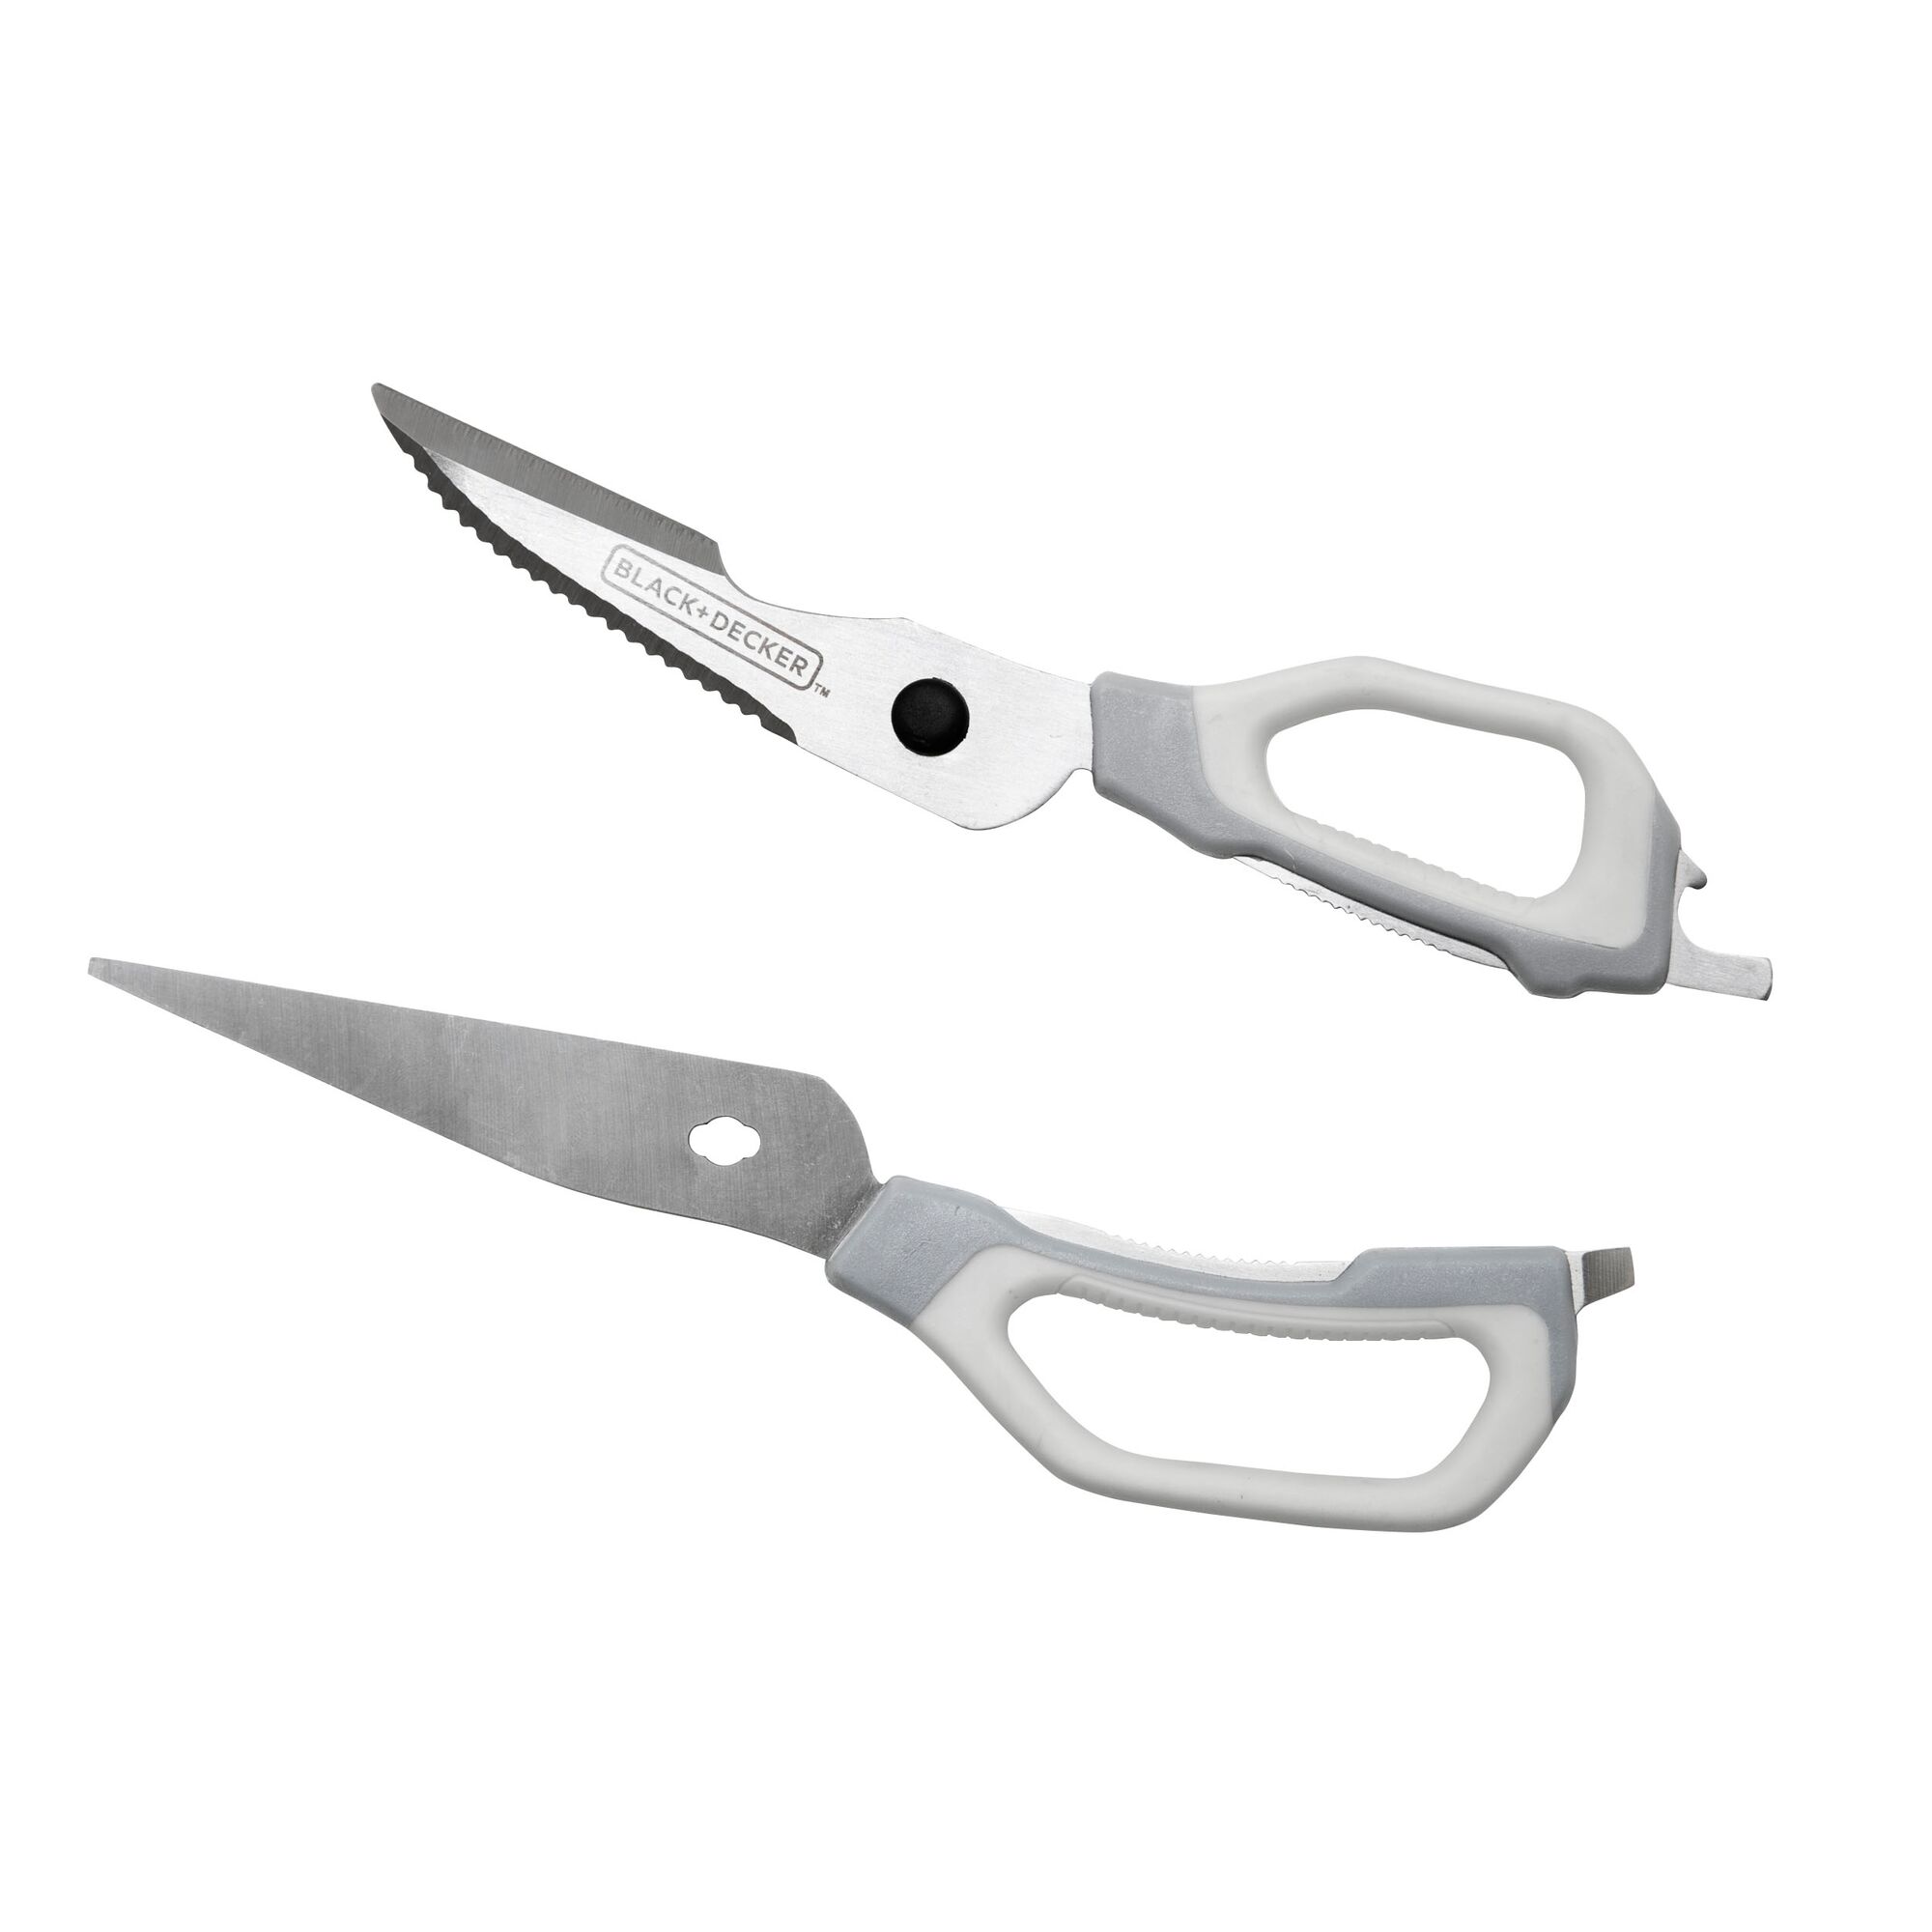 separated blades of craft scissors on a white background